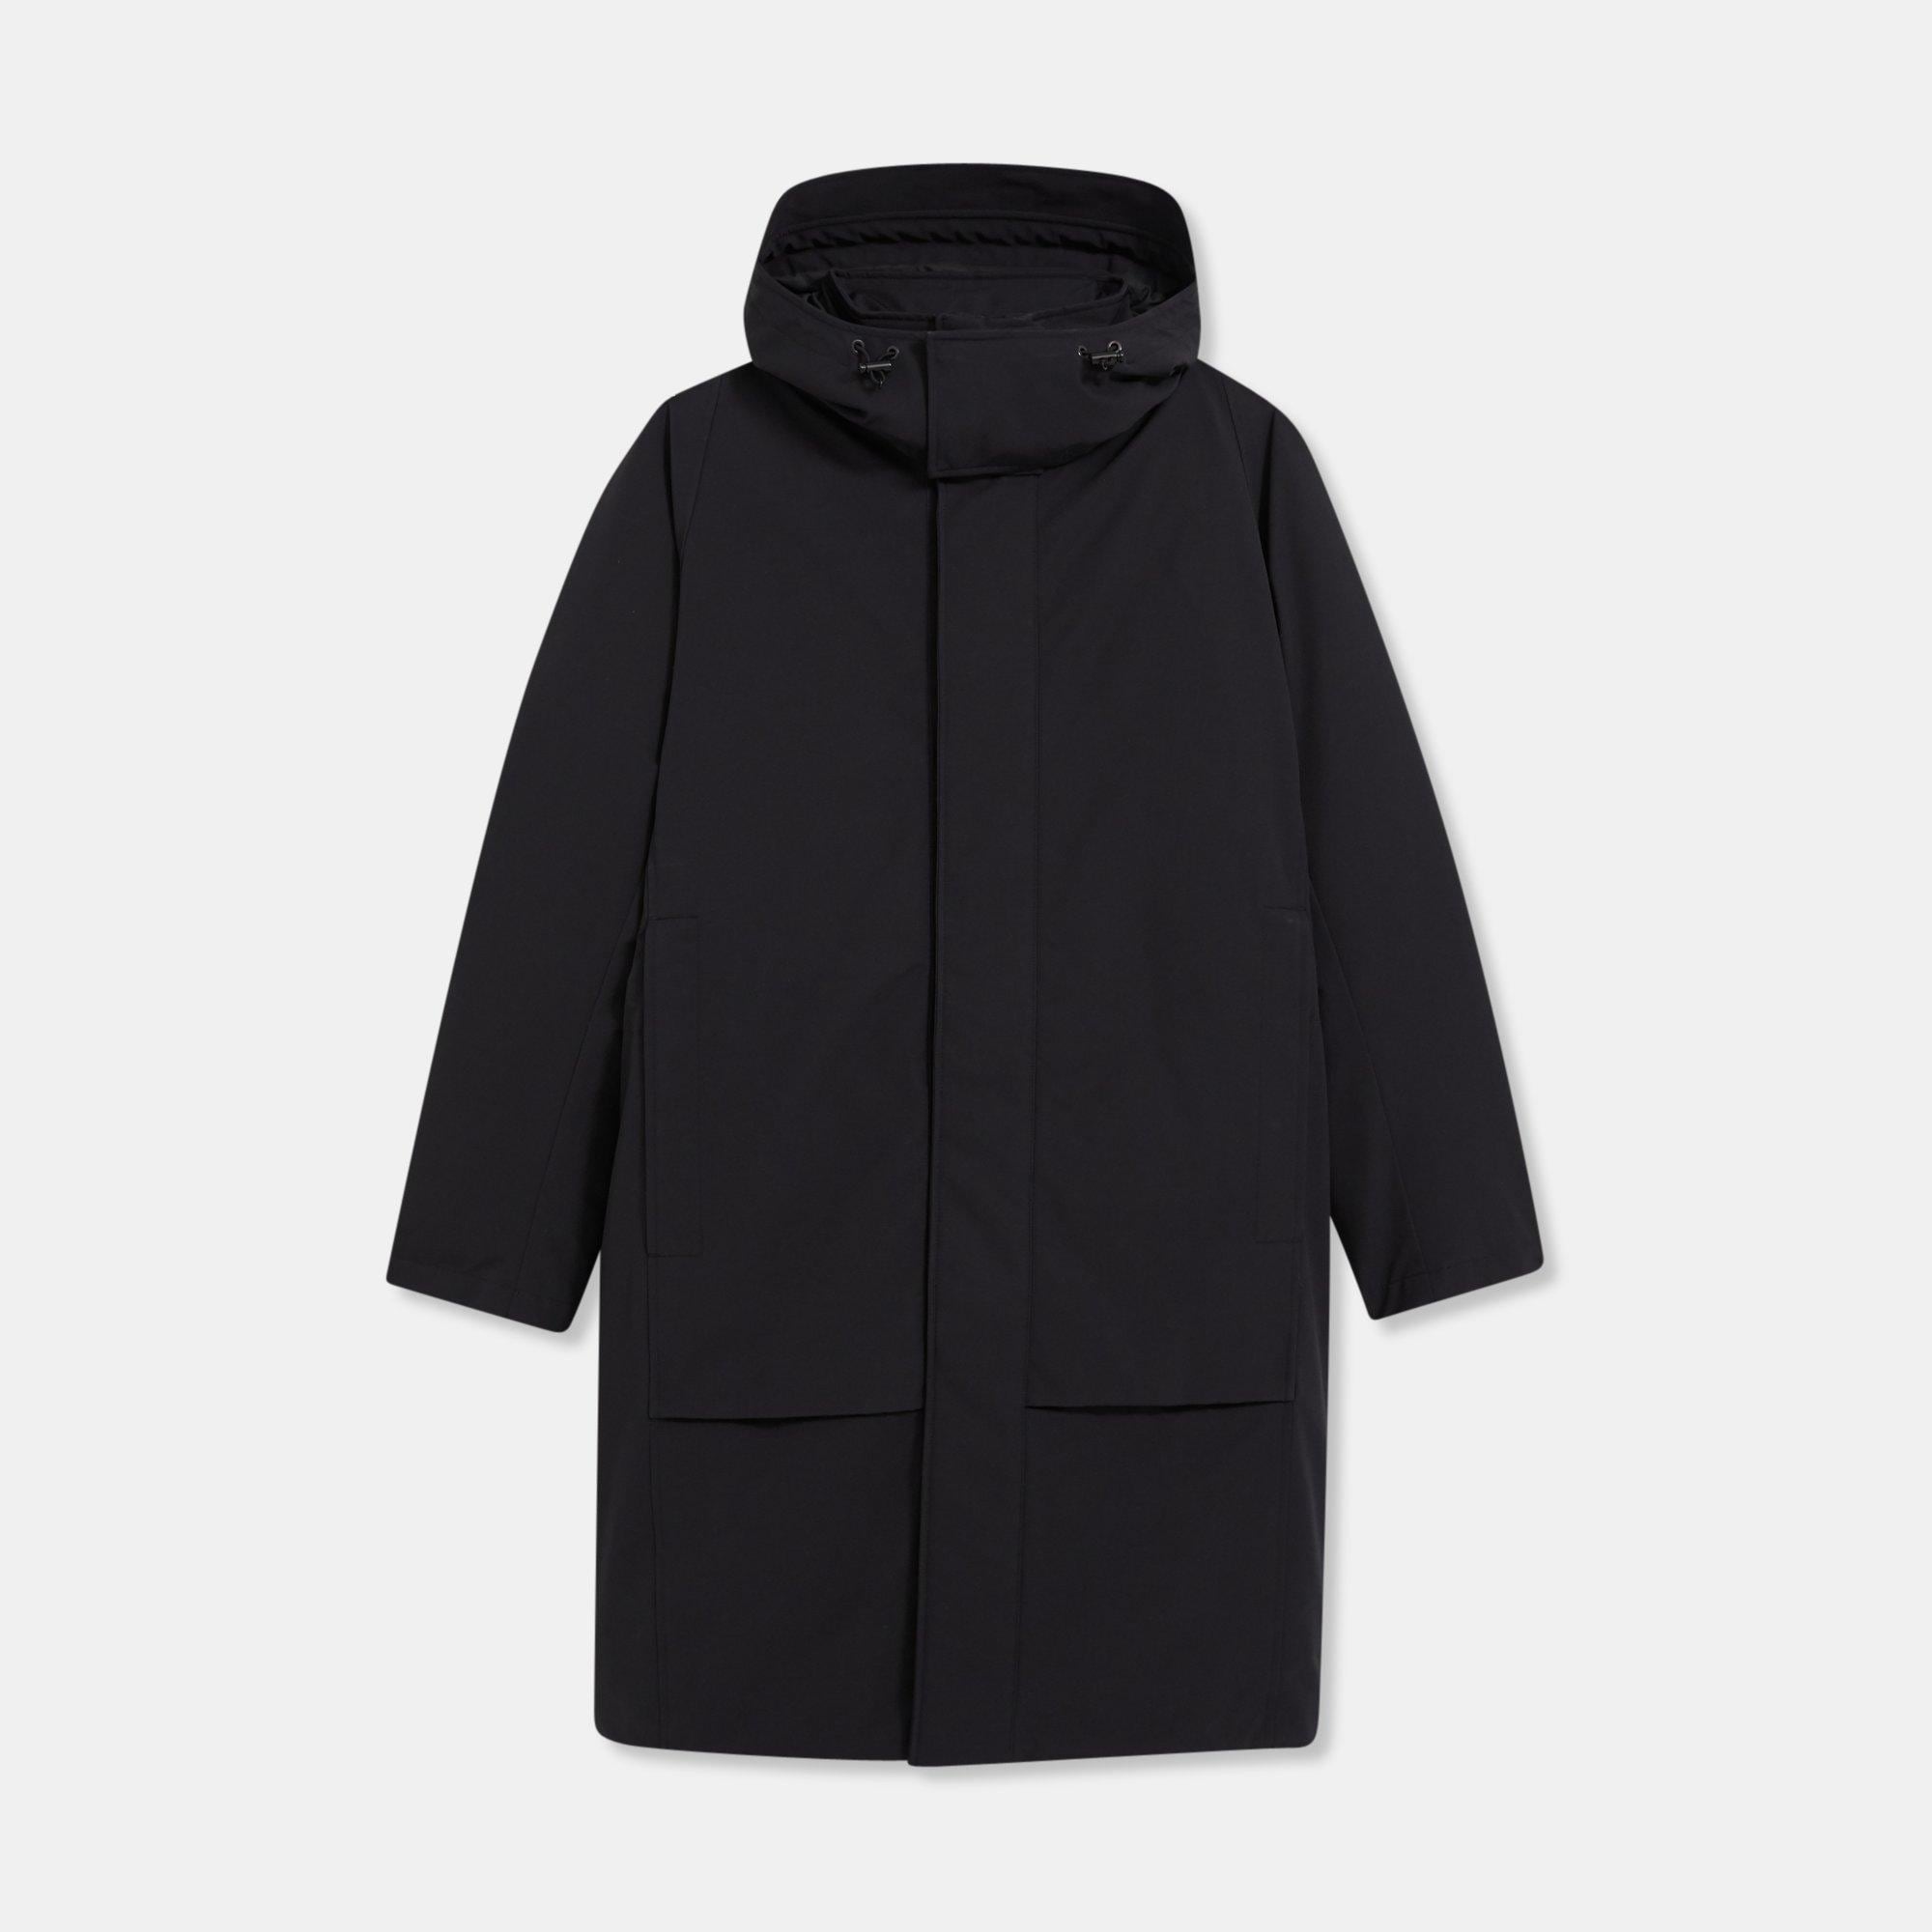 Theory Women's Double-Face Hooded Parka